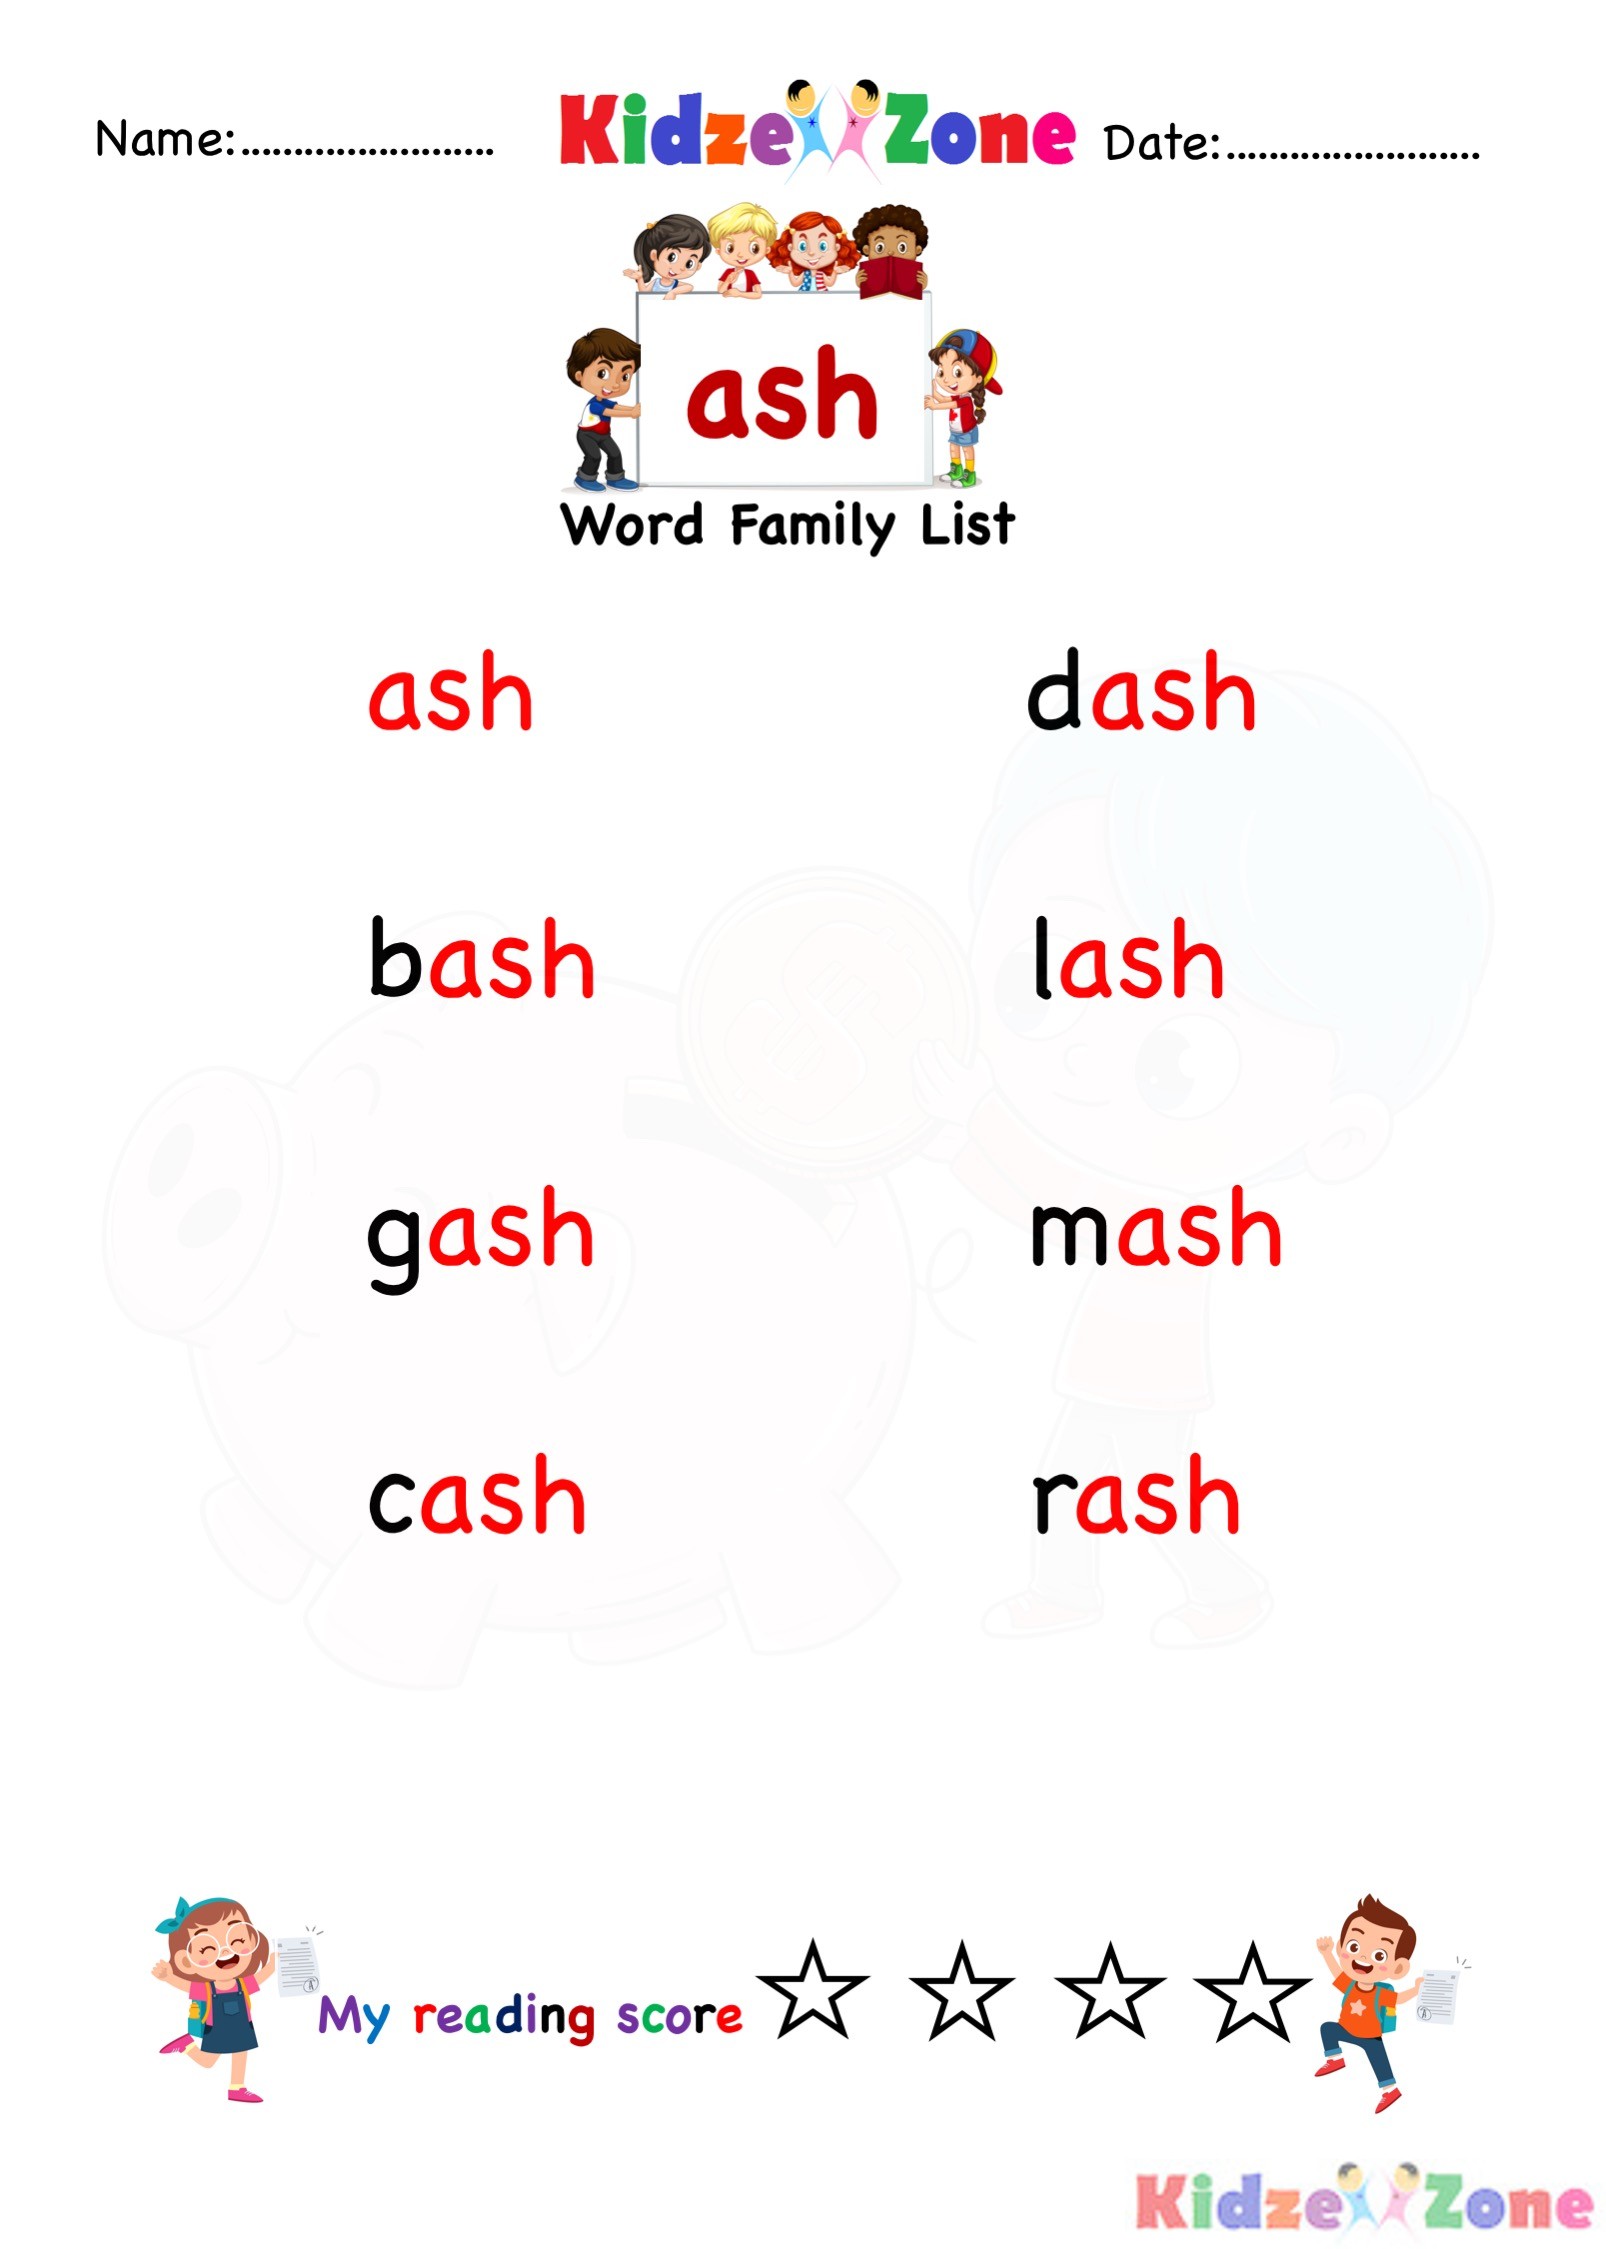 Explore and learn words from "ash" word